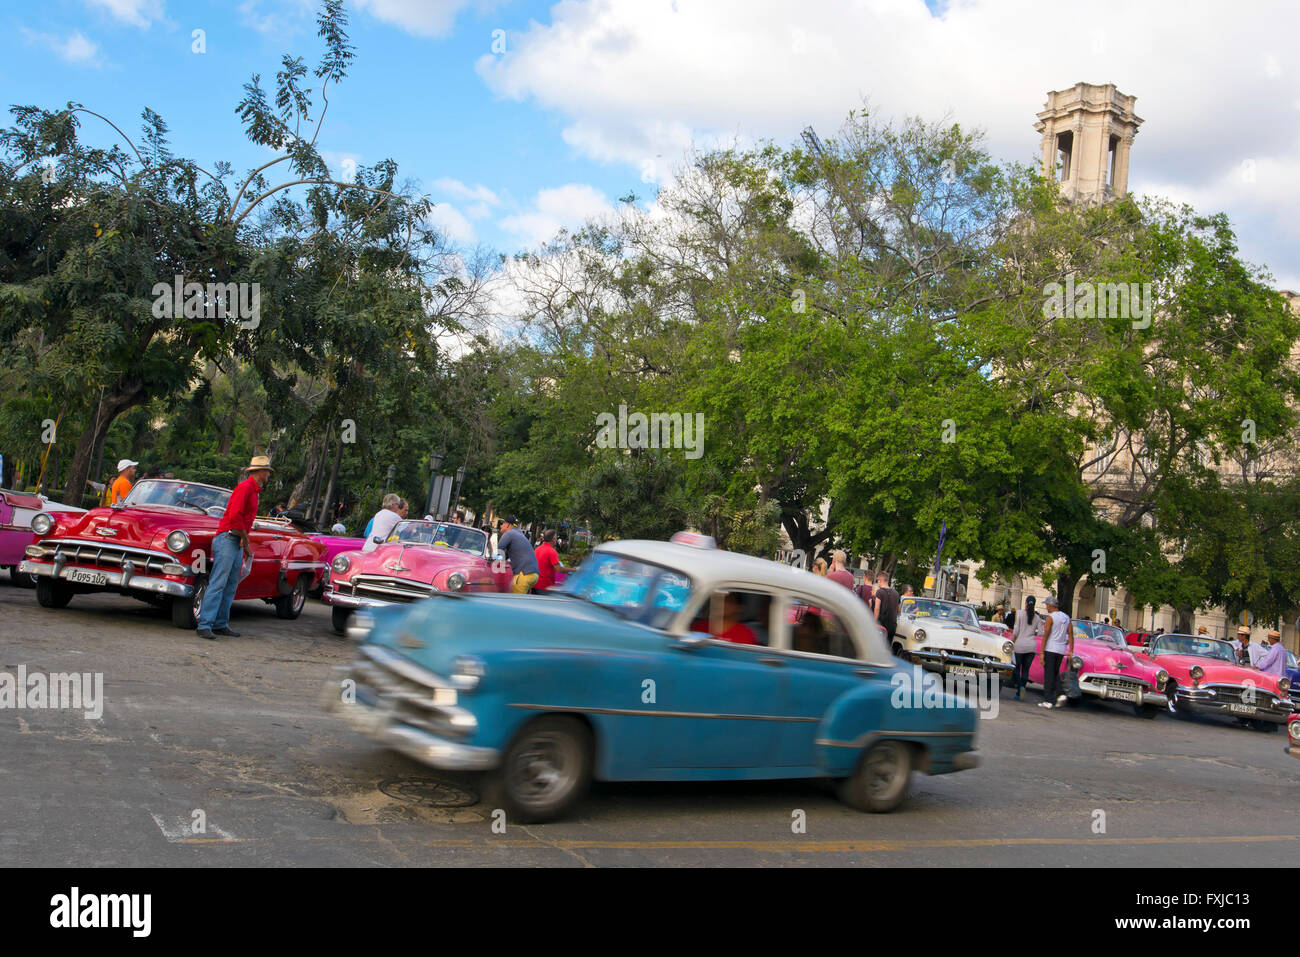 Horizontal view of lots of classic American cars parked in a row in Havana, Cuba. Stock Photo